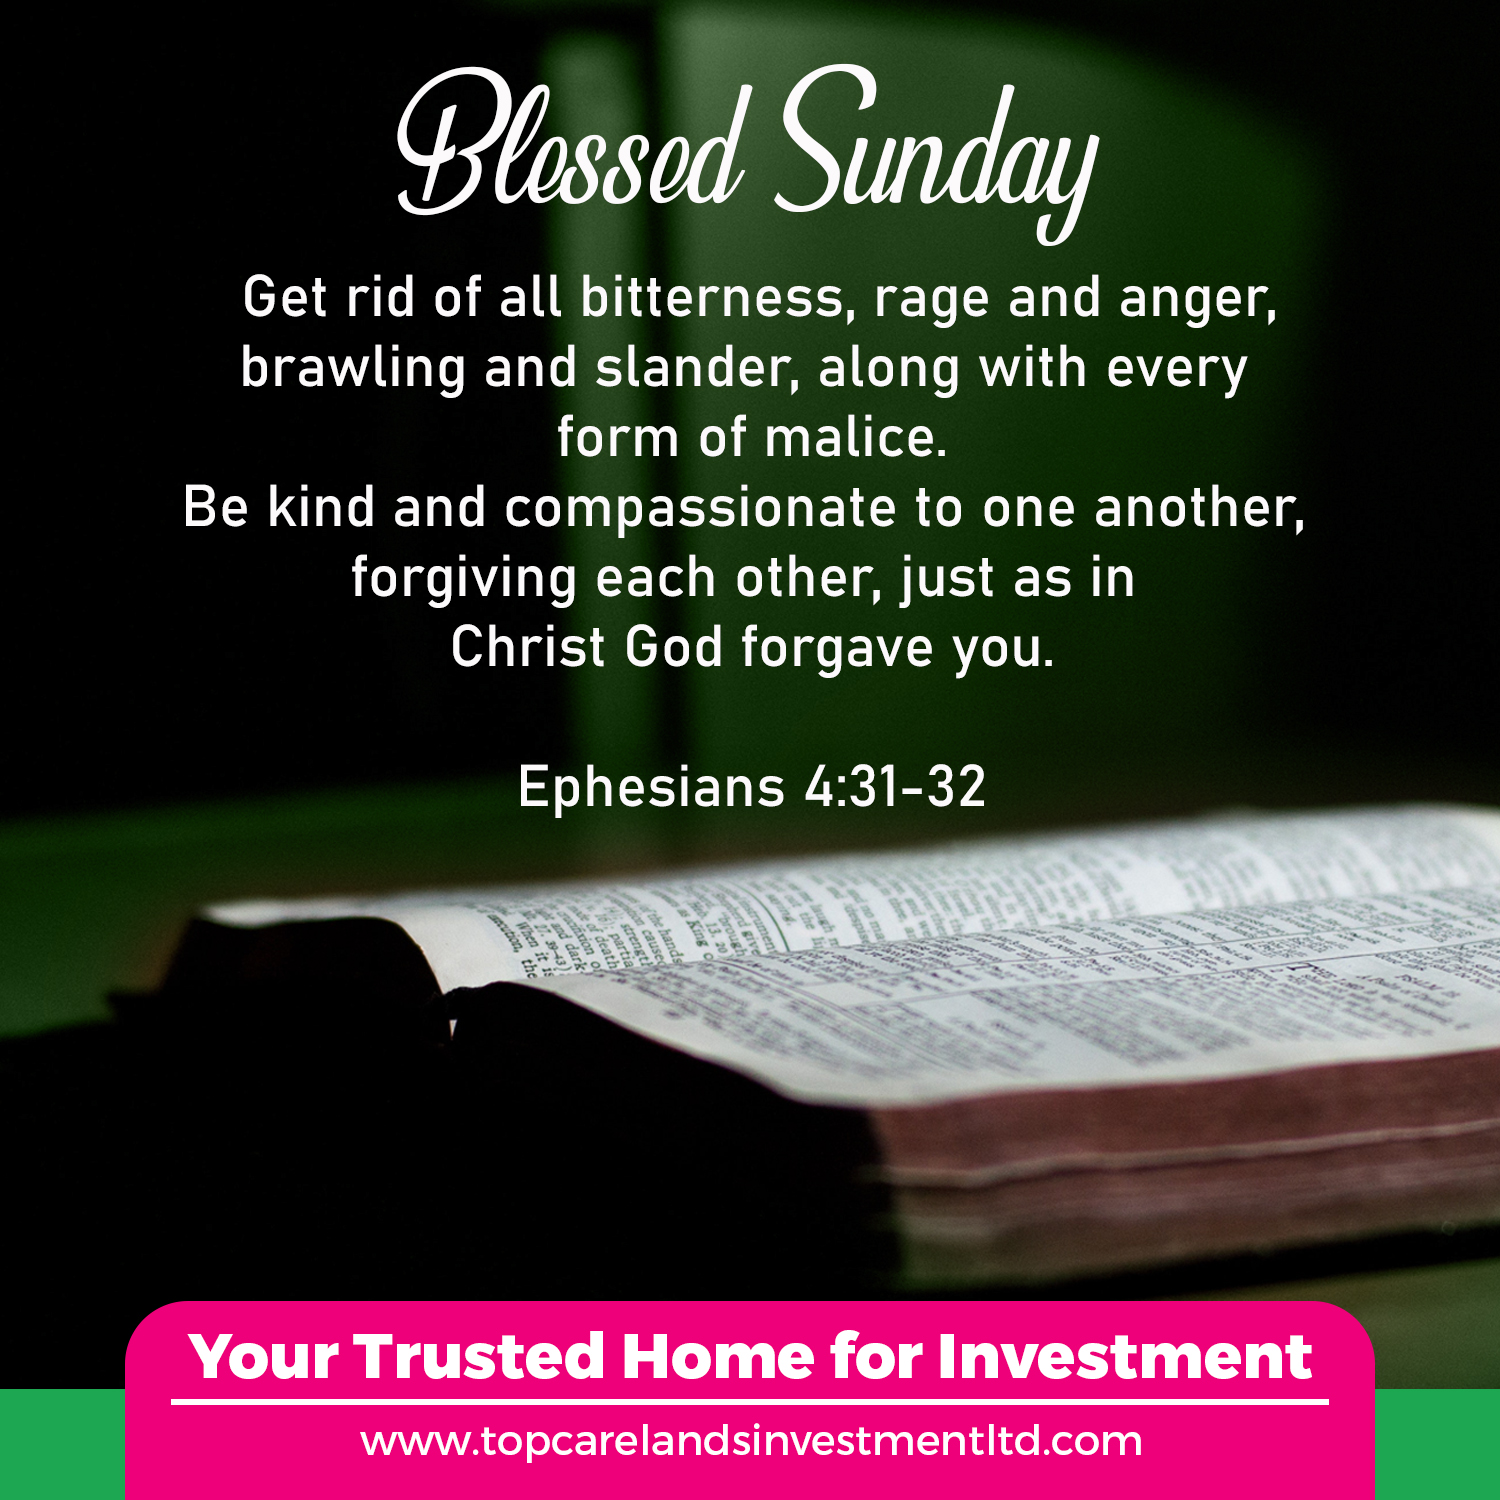 Blessed Sunday – Topcare Lands